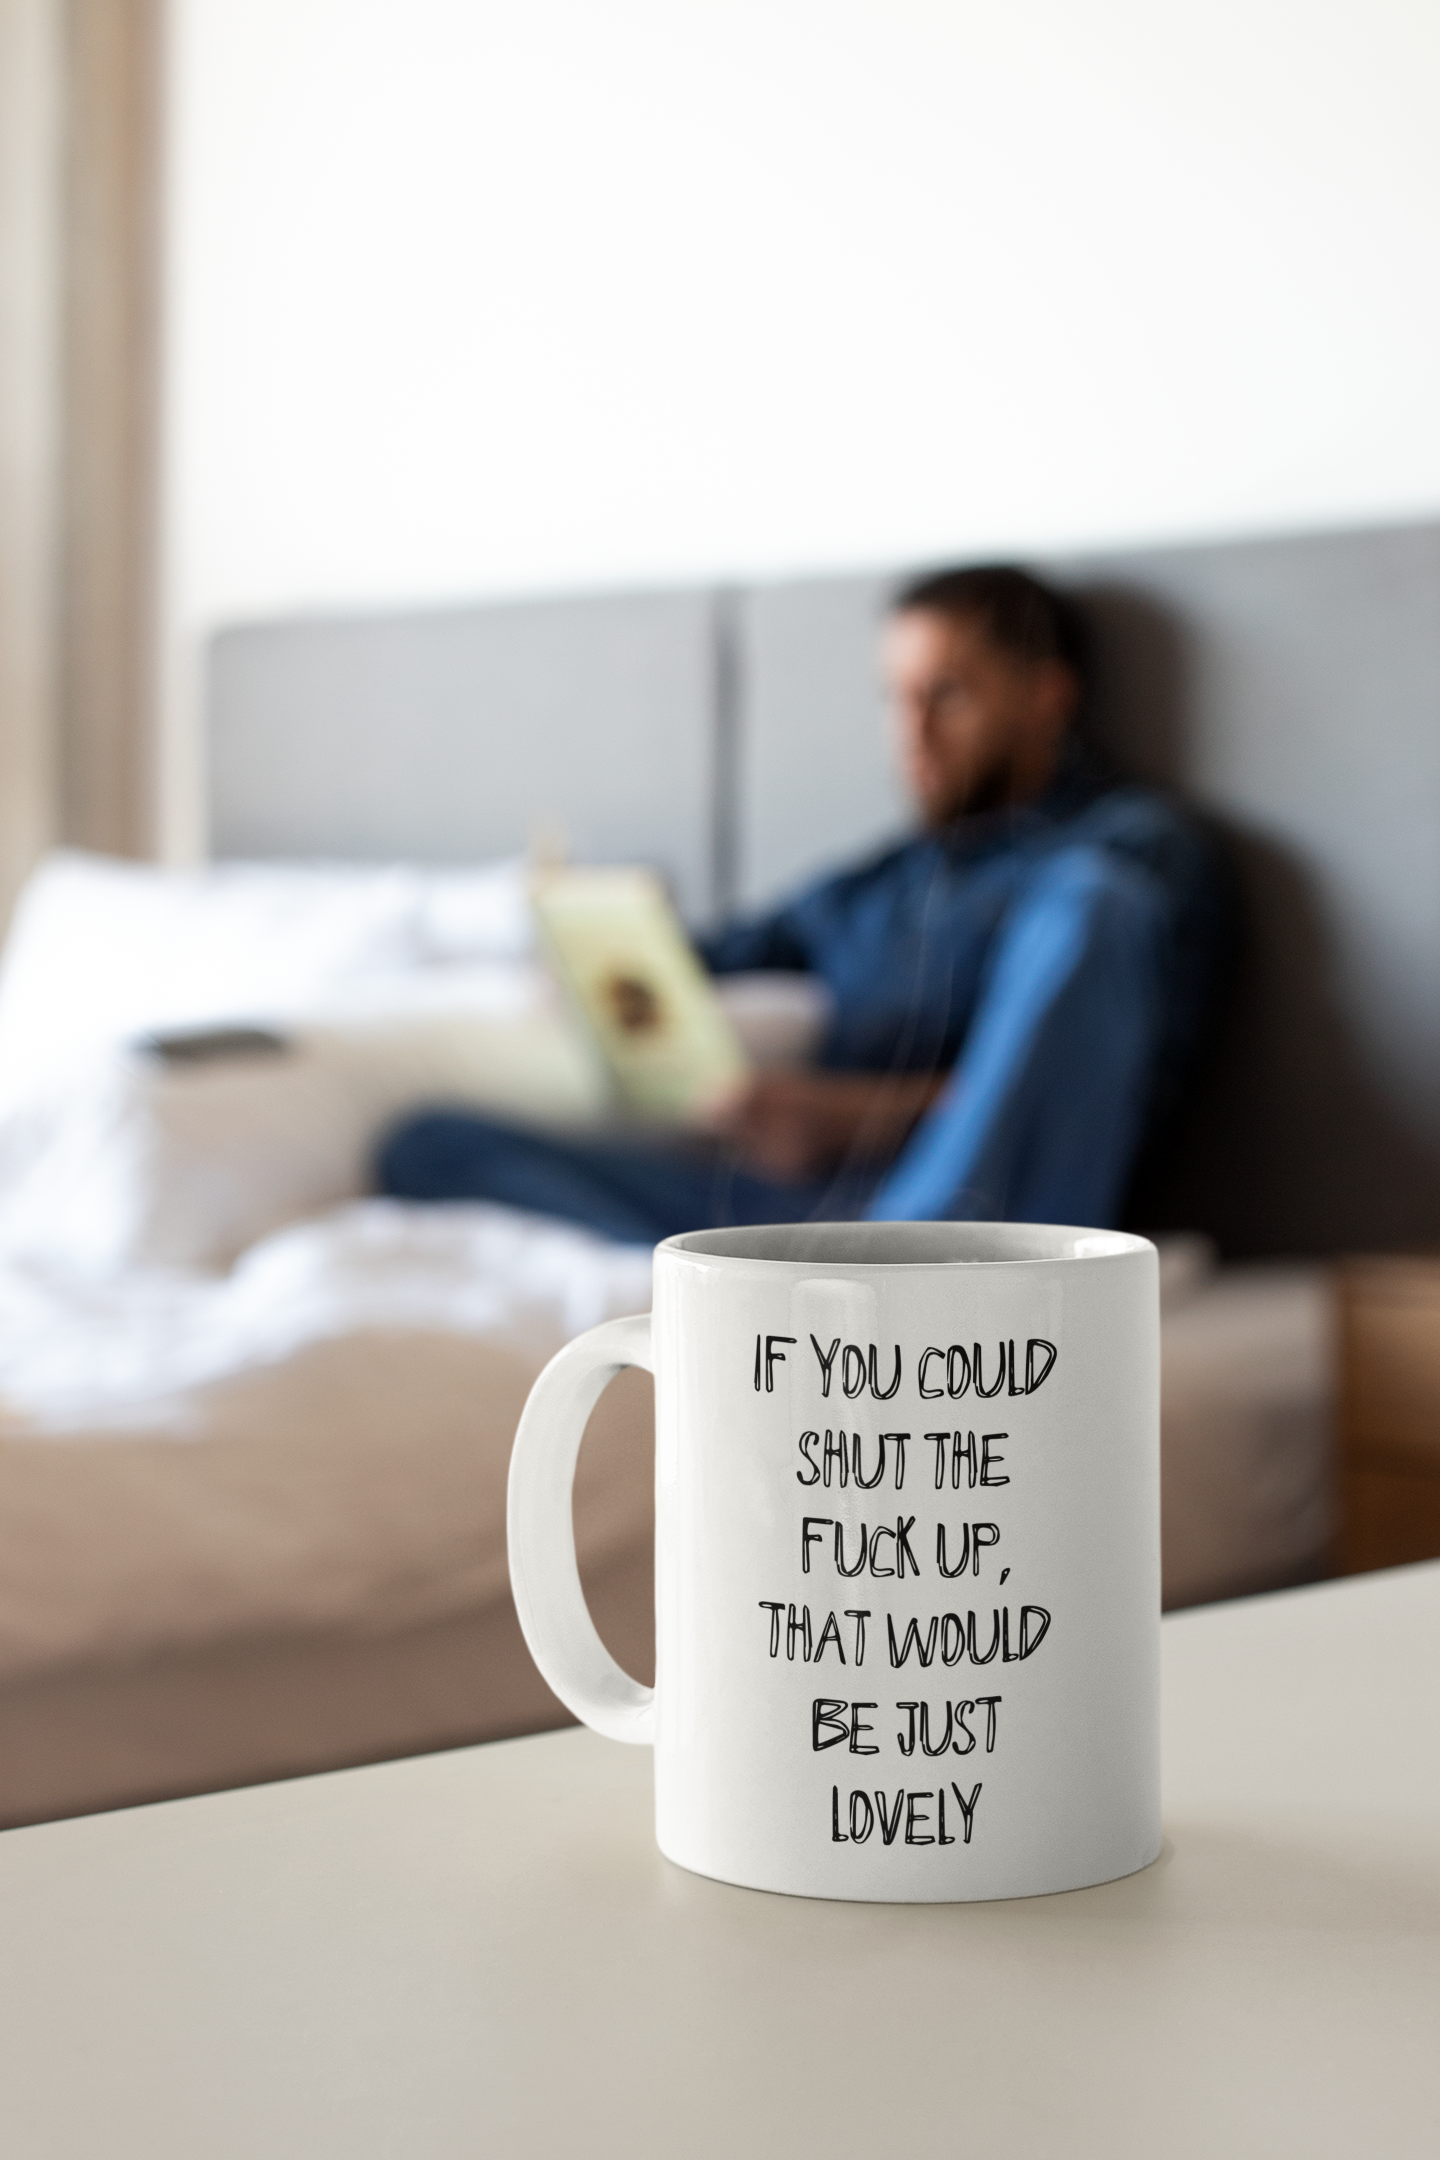 White mug with the quote if you could shut the fuck up that would be just lovely. Printed in black ink.